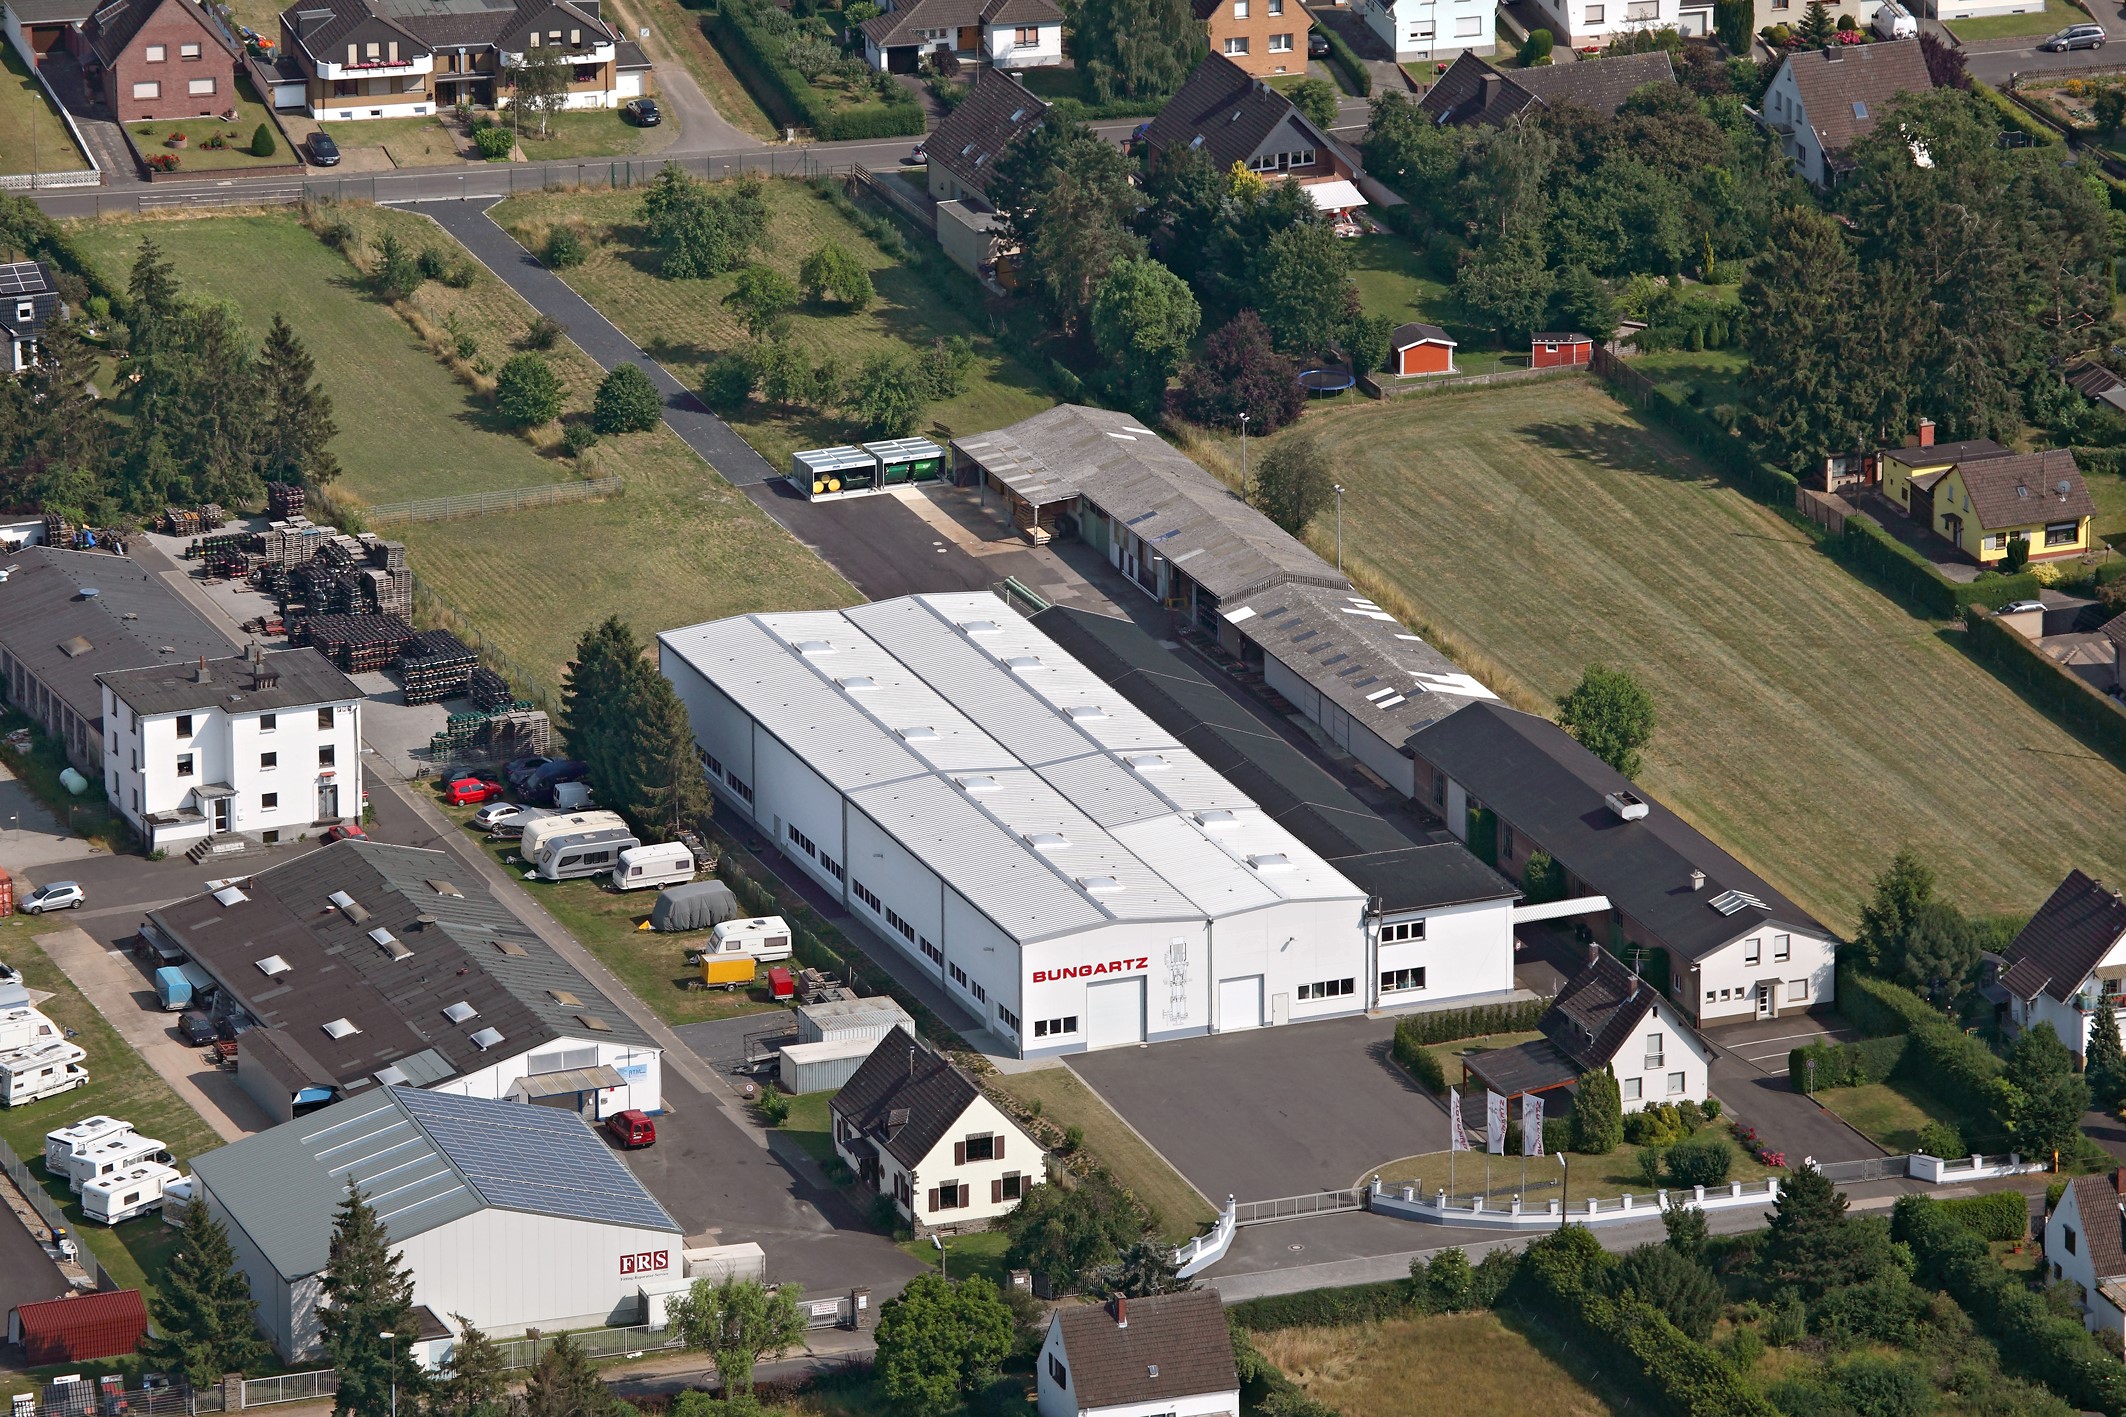 The production facility of Bungartz centrifugal pumps in the Eifel region.